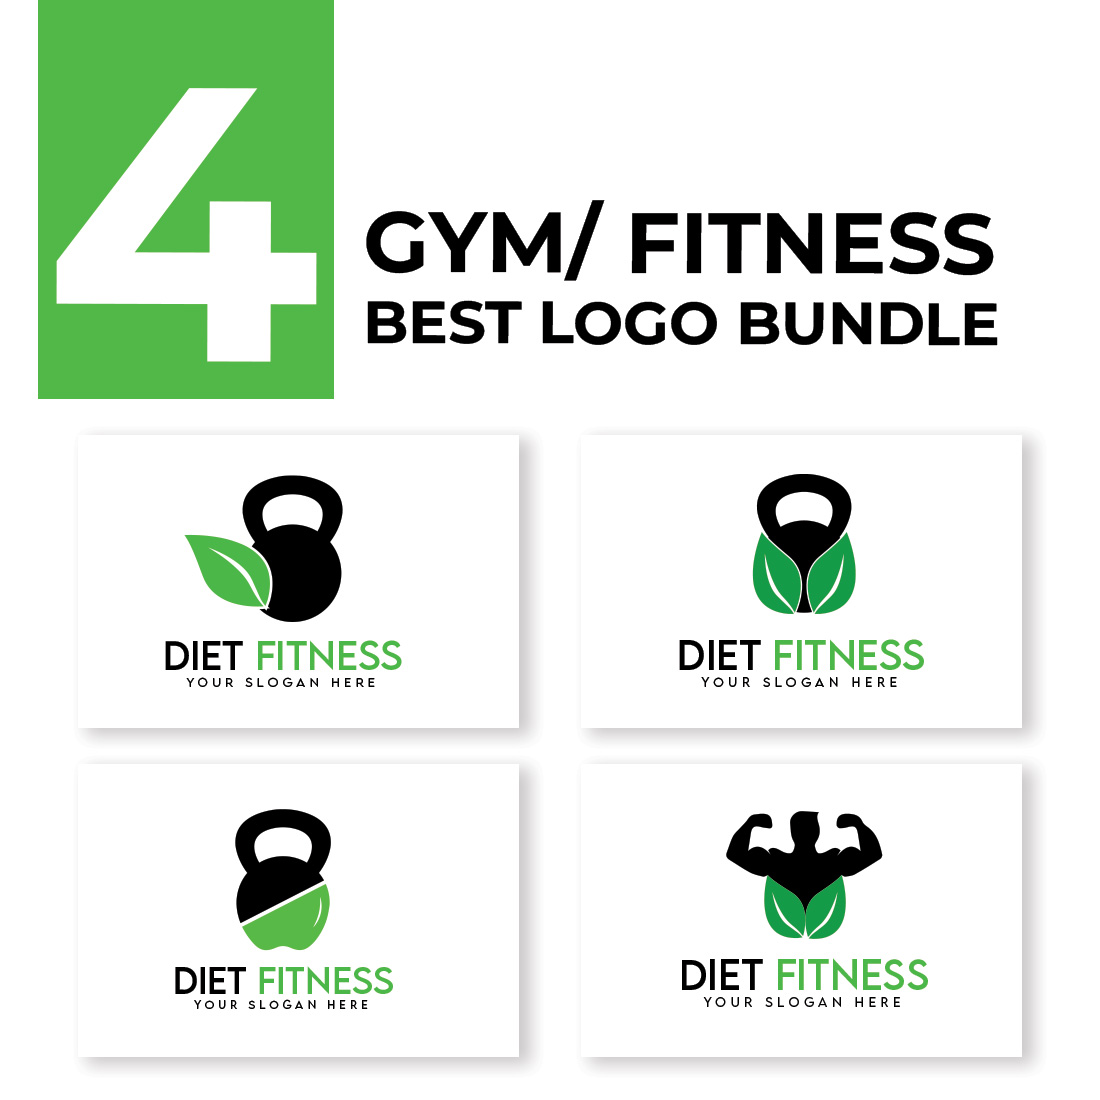 Diet Fitness Logo Template cover image.